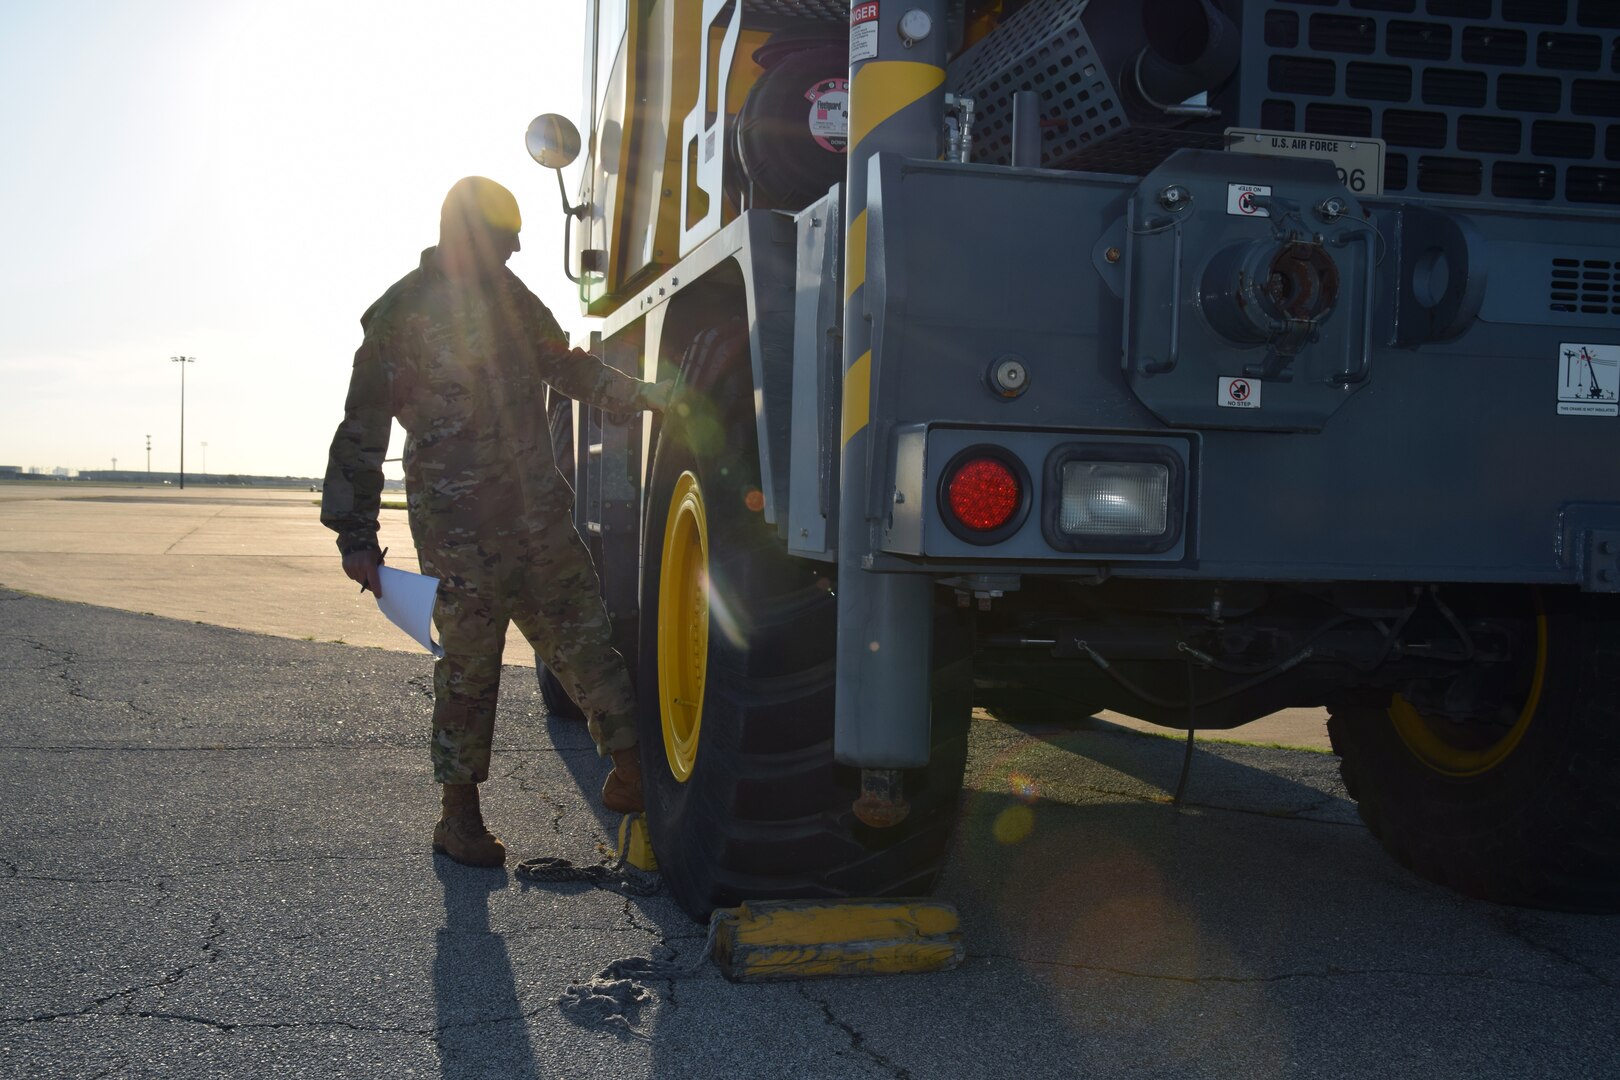 Tech. Sgt. Muris Secerbegovic, 433rd Maintenance Group quality assurance inspector, inspects a crane Aug. 3, 2020, at Joint Base San Antonio-Lackland, Texas.